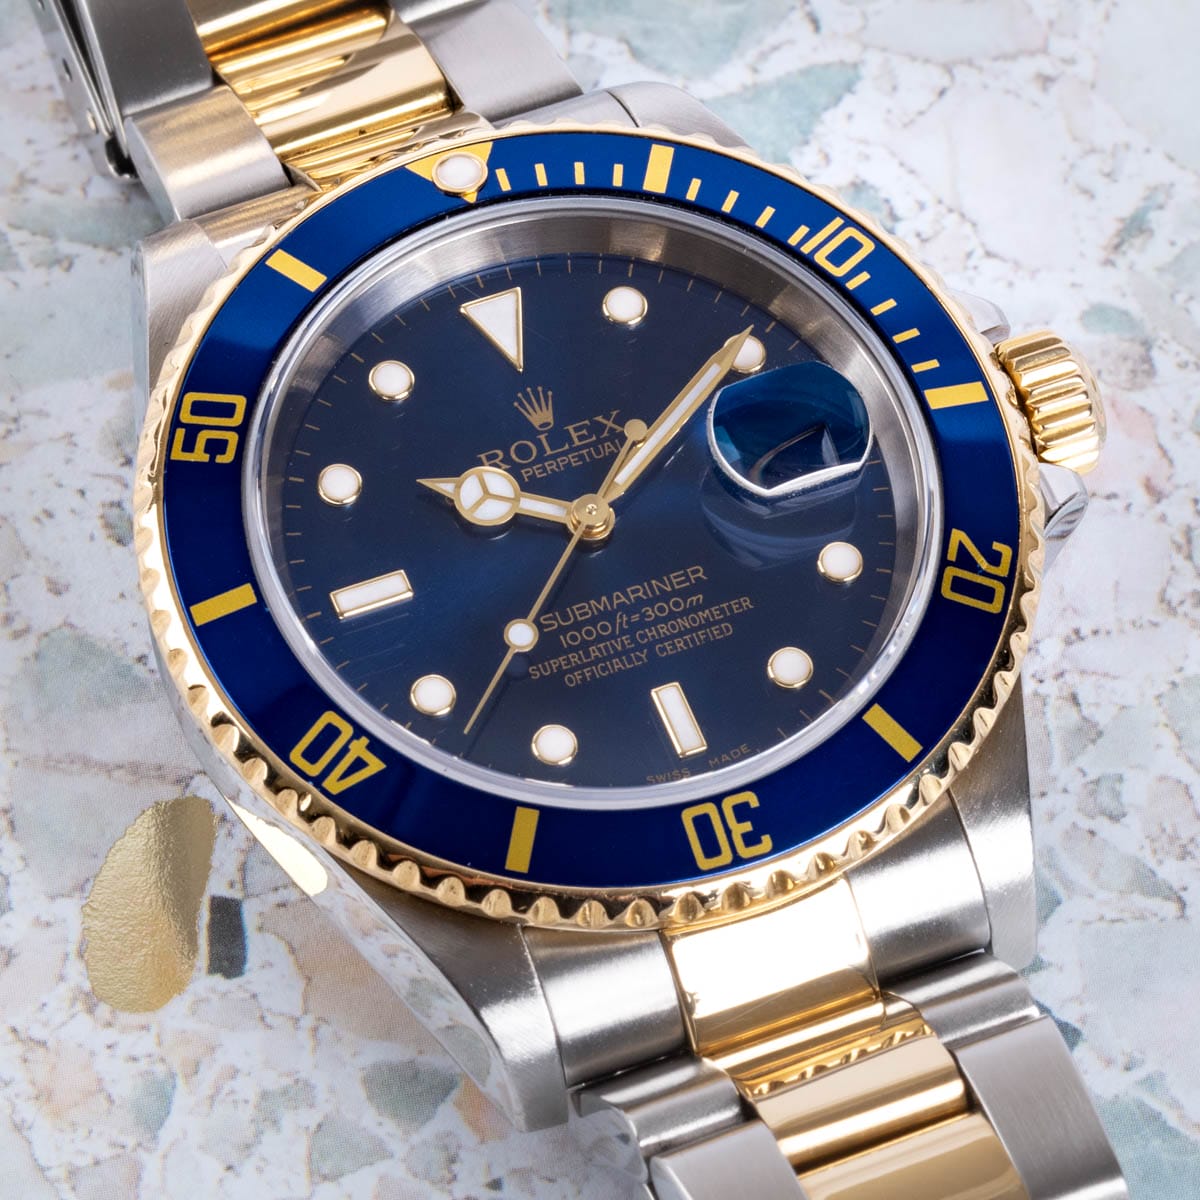 Stylied photo of  of Submariner Date